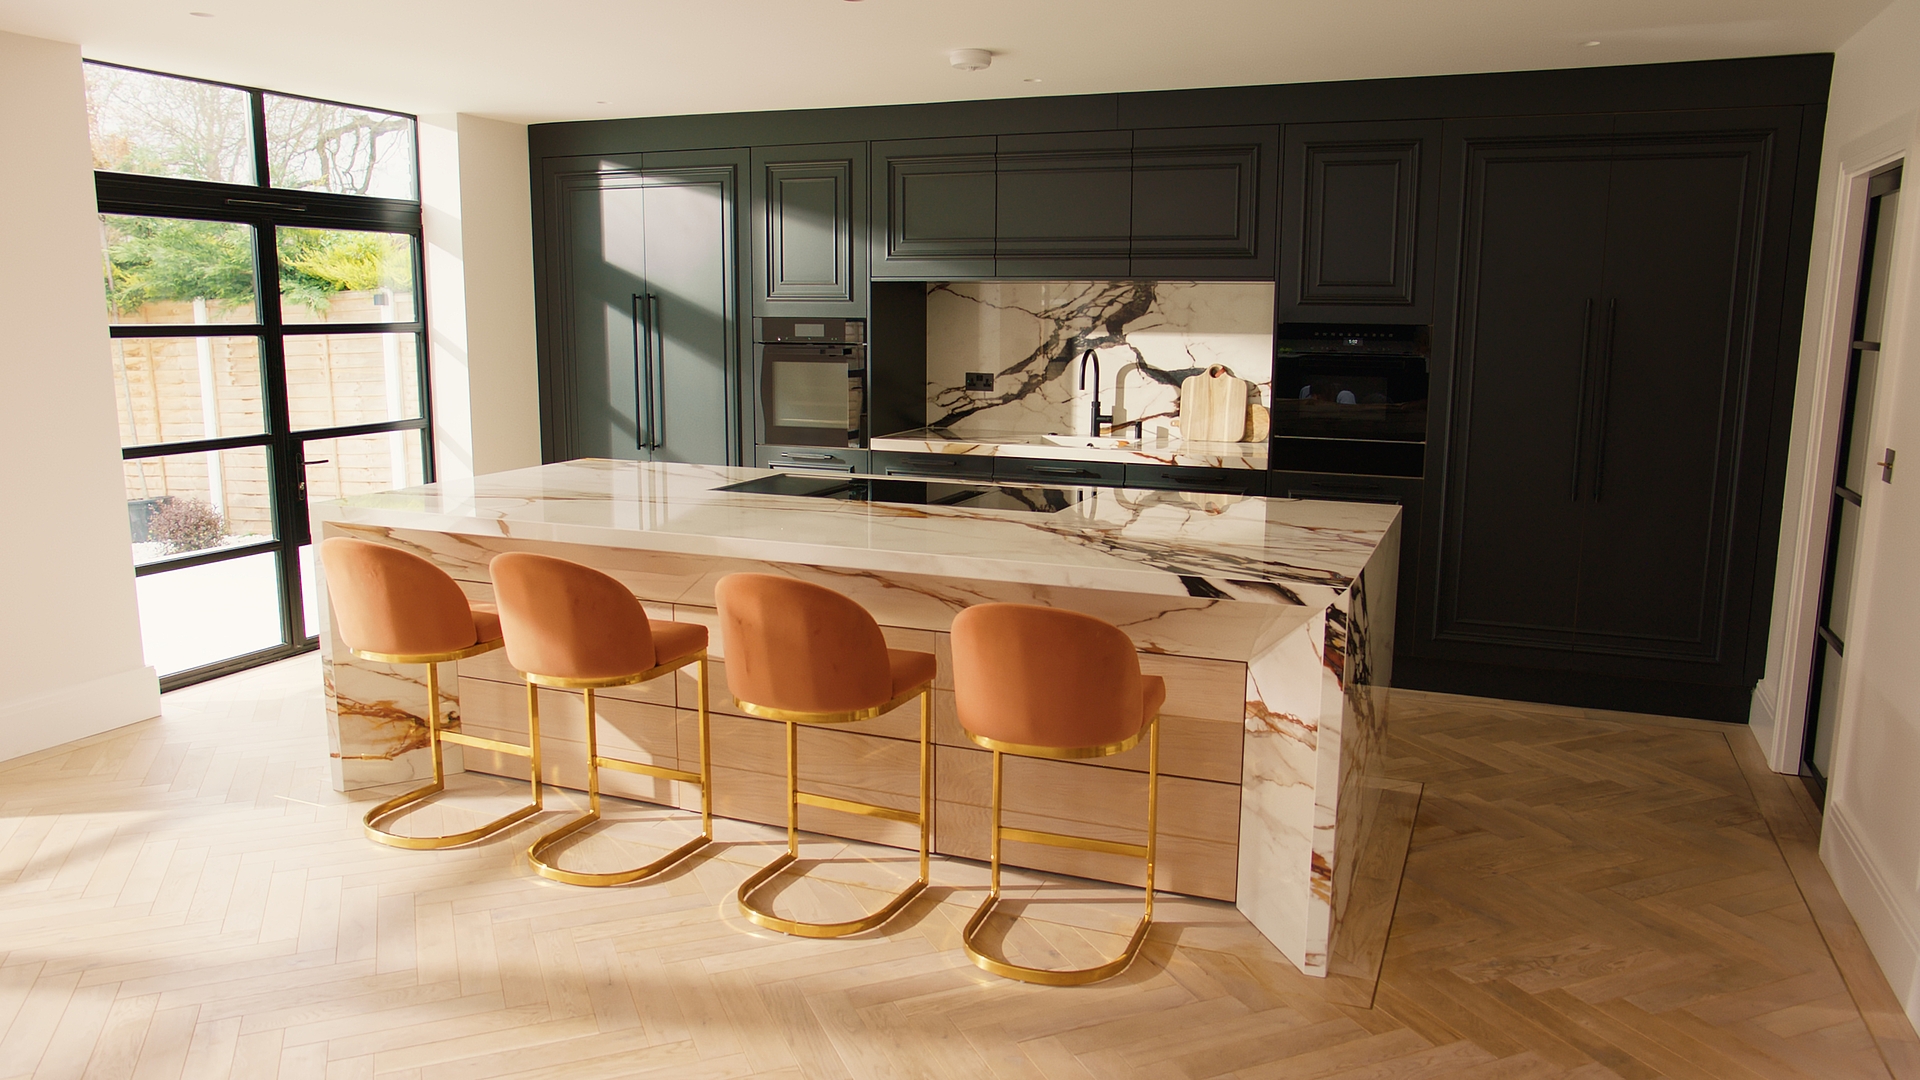 A dream kitchen in Berkshire with a large cooking island and the BORA Classic